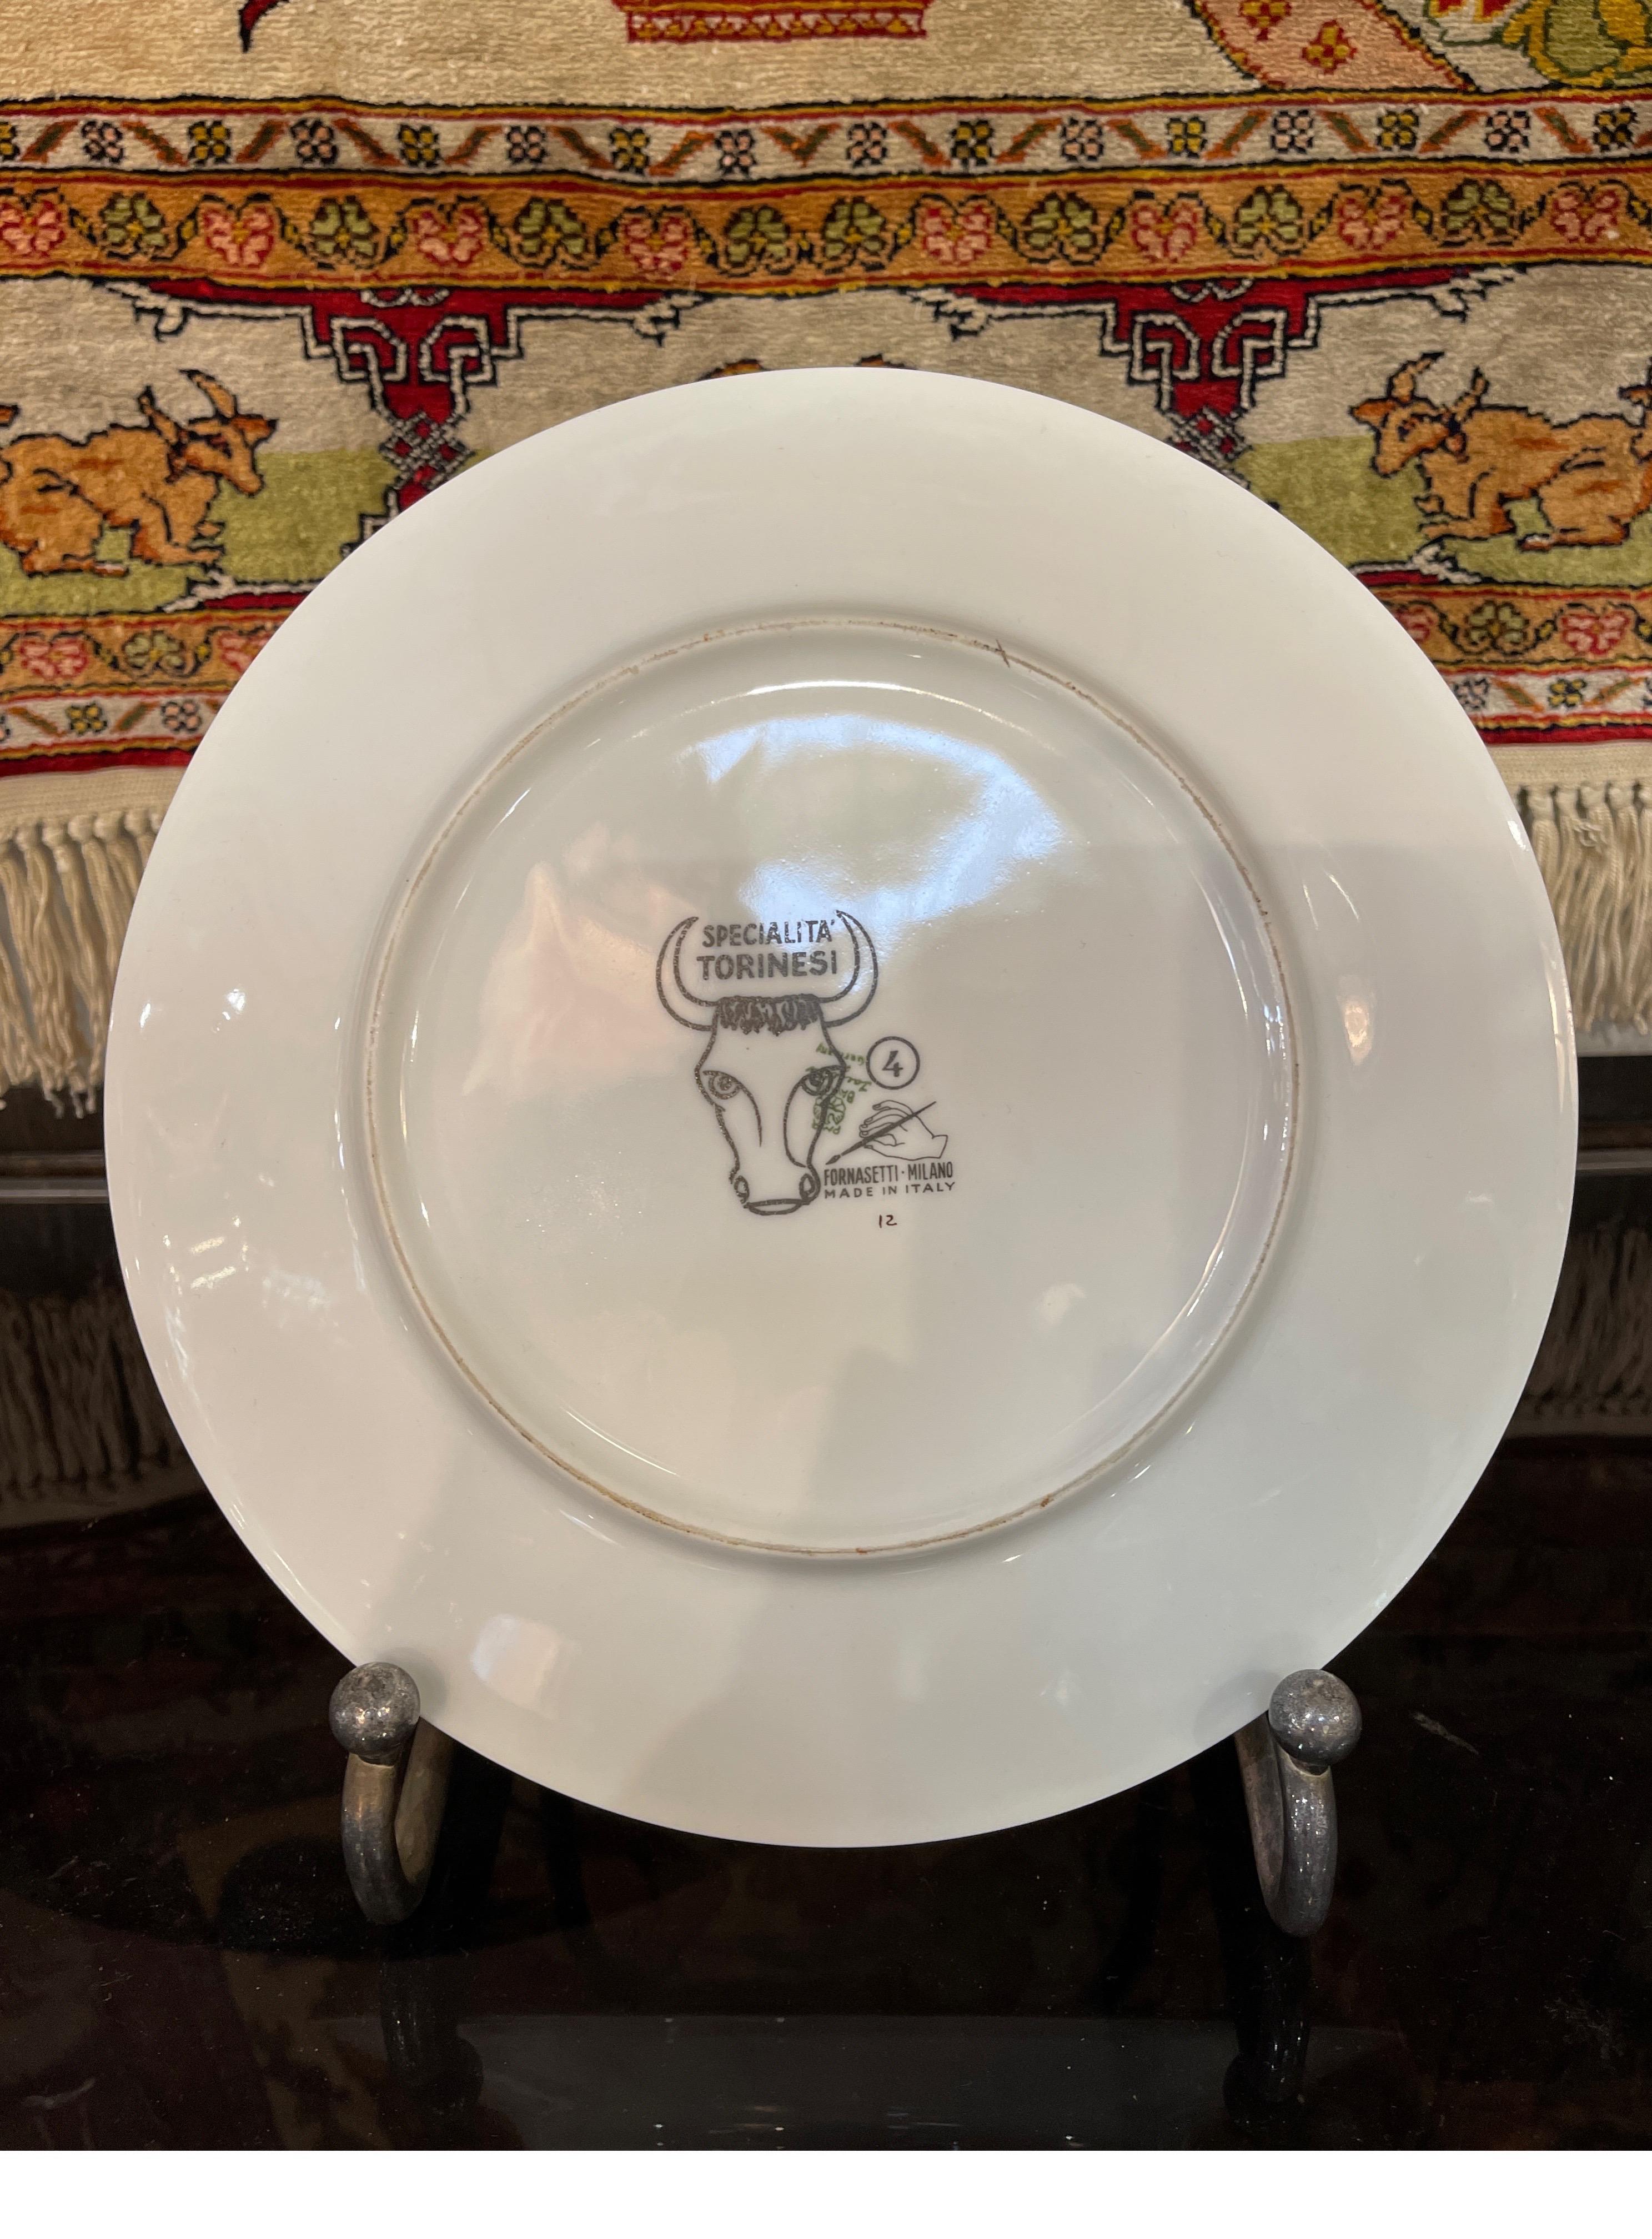 Modern Fornasetti Recipe Plate from the Torinesi Specialties Series N.4